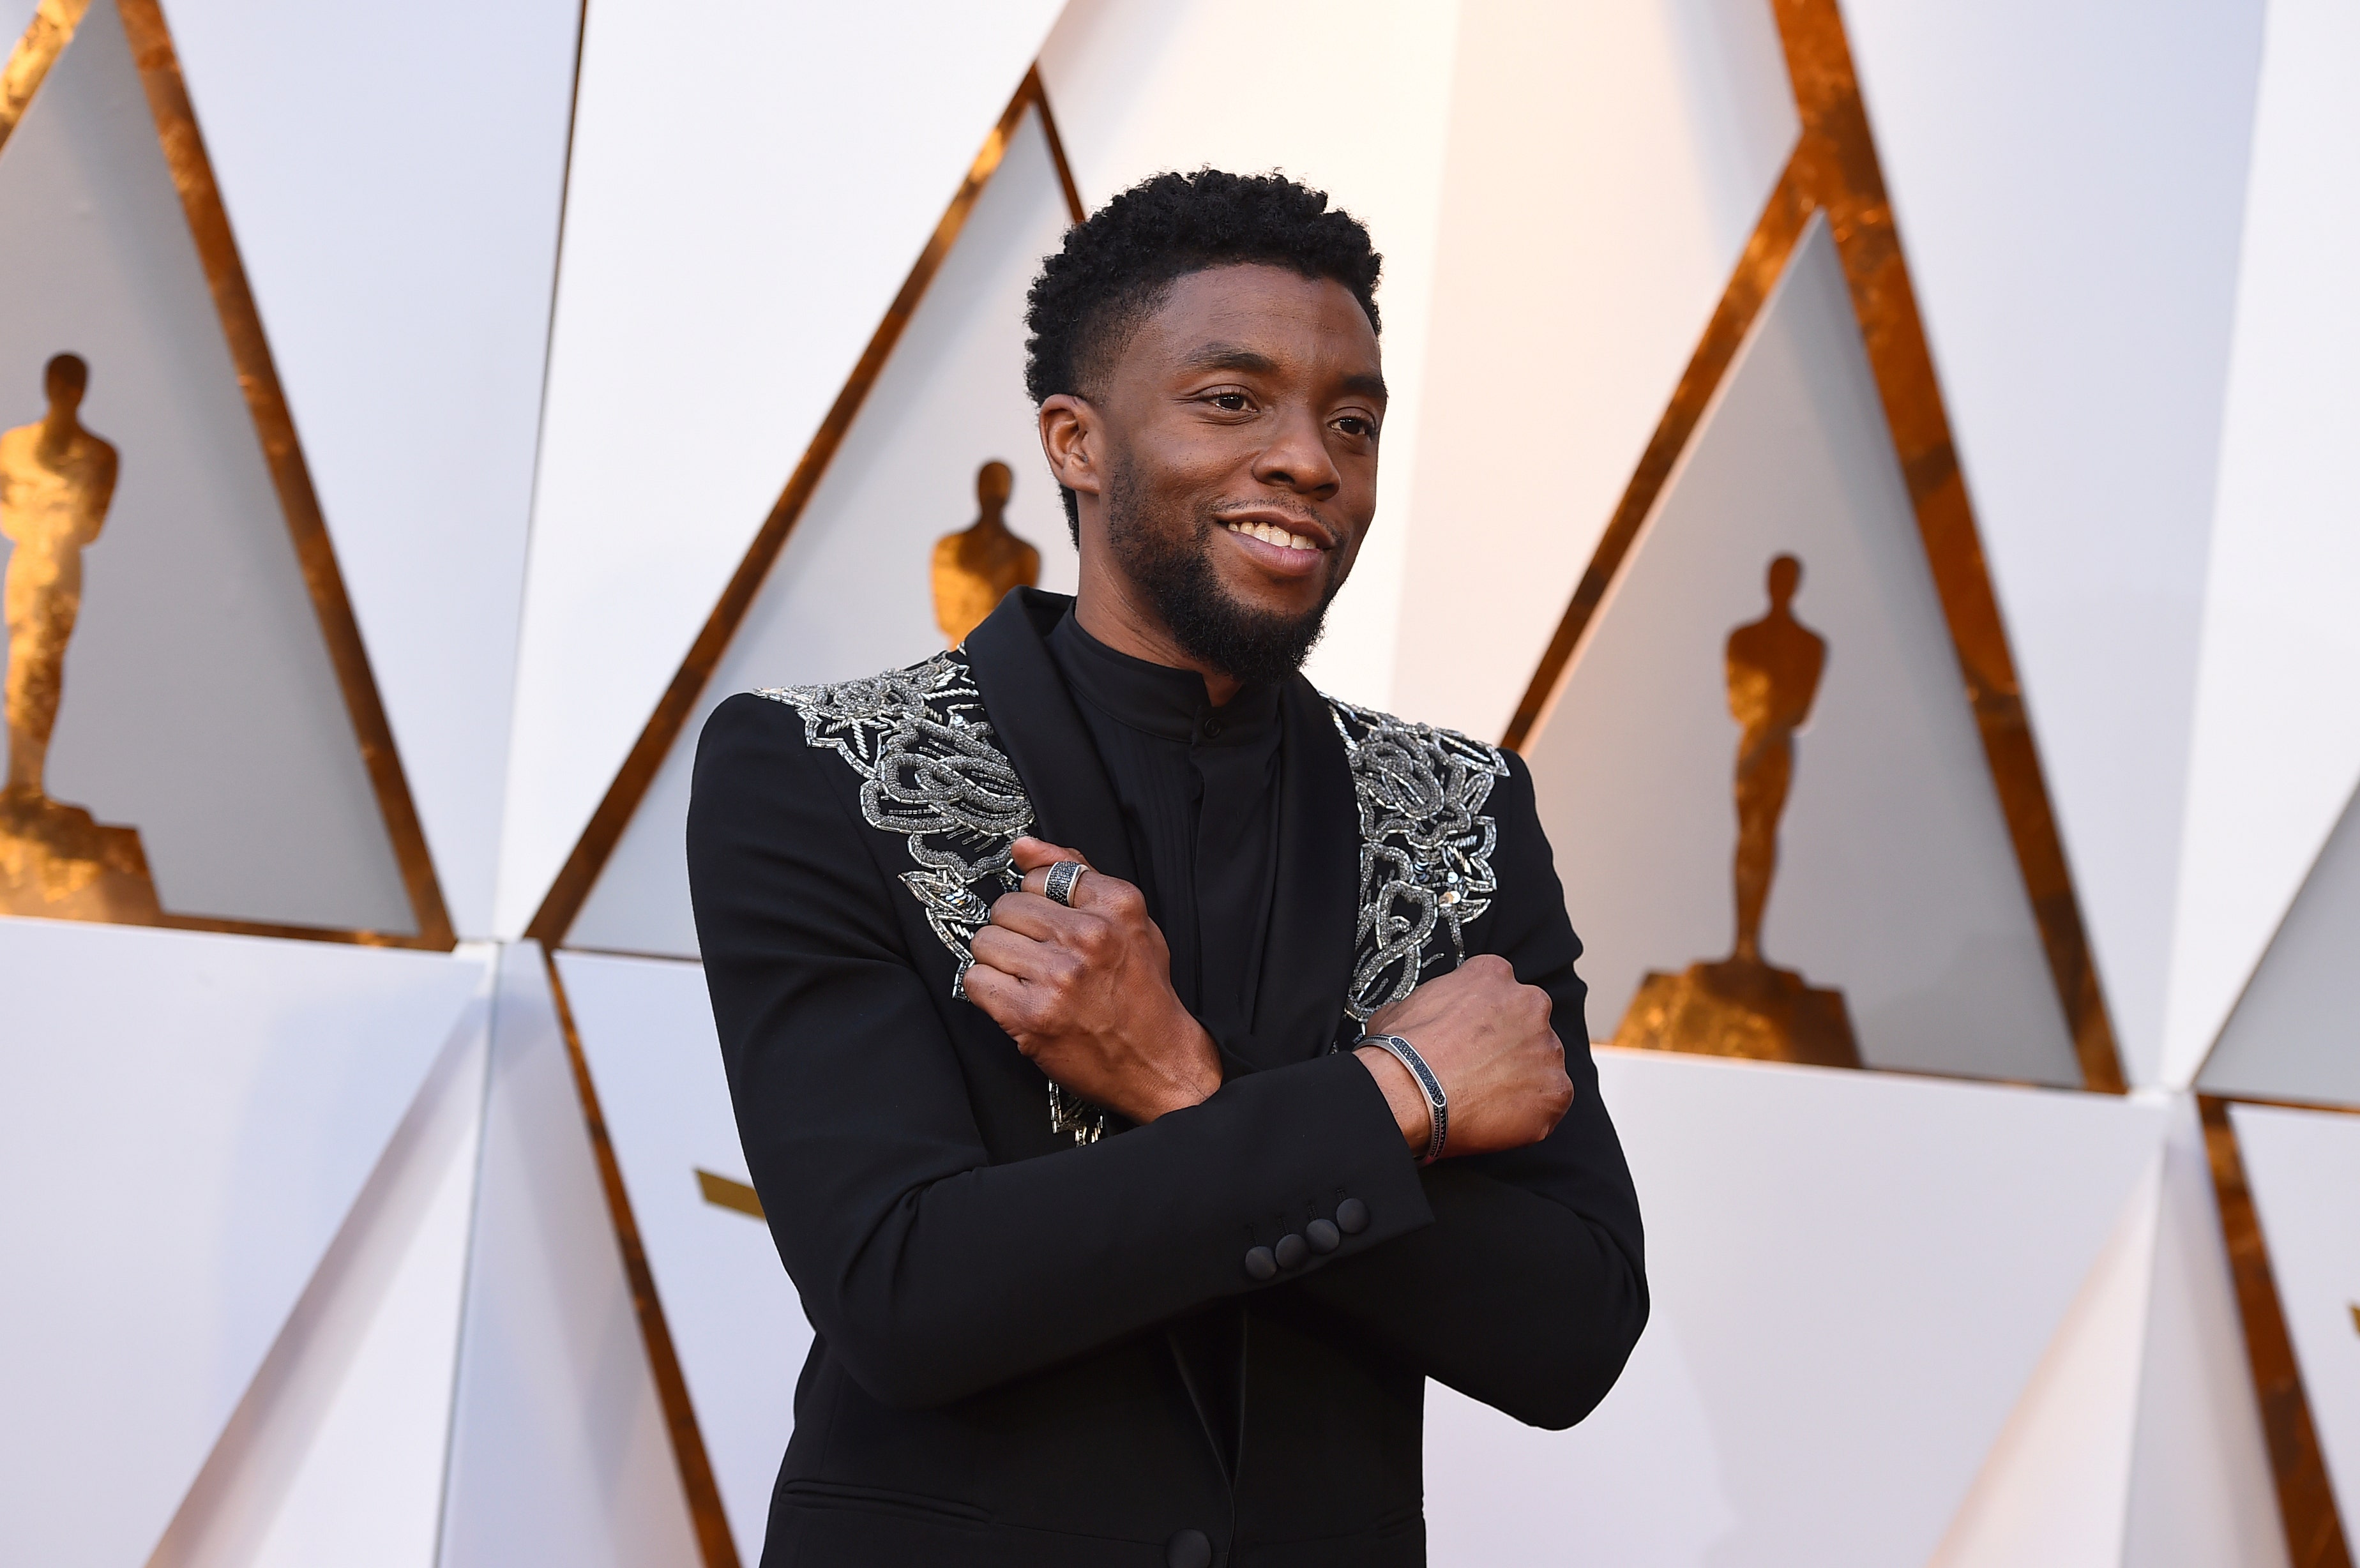 Celebrities react to Chadwick Boseman’s death: ‘Our hearts are broken’